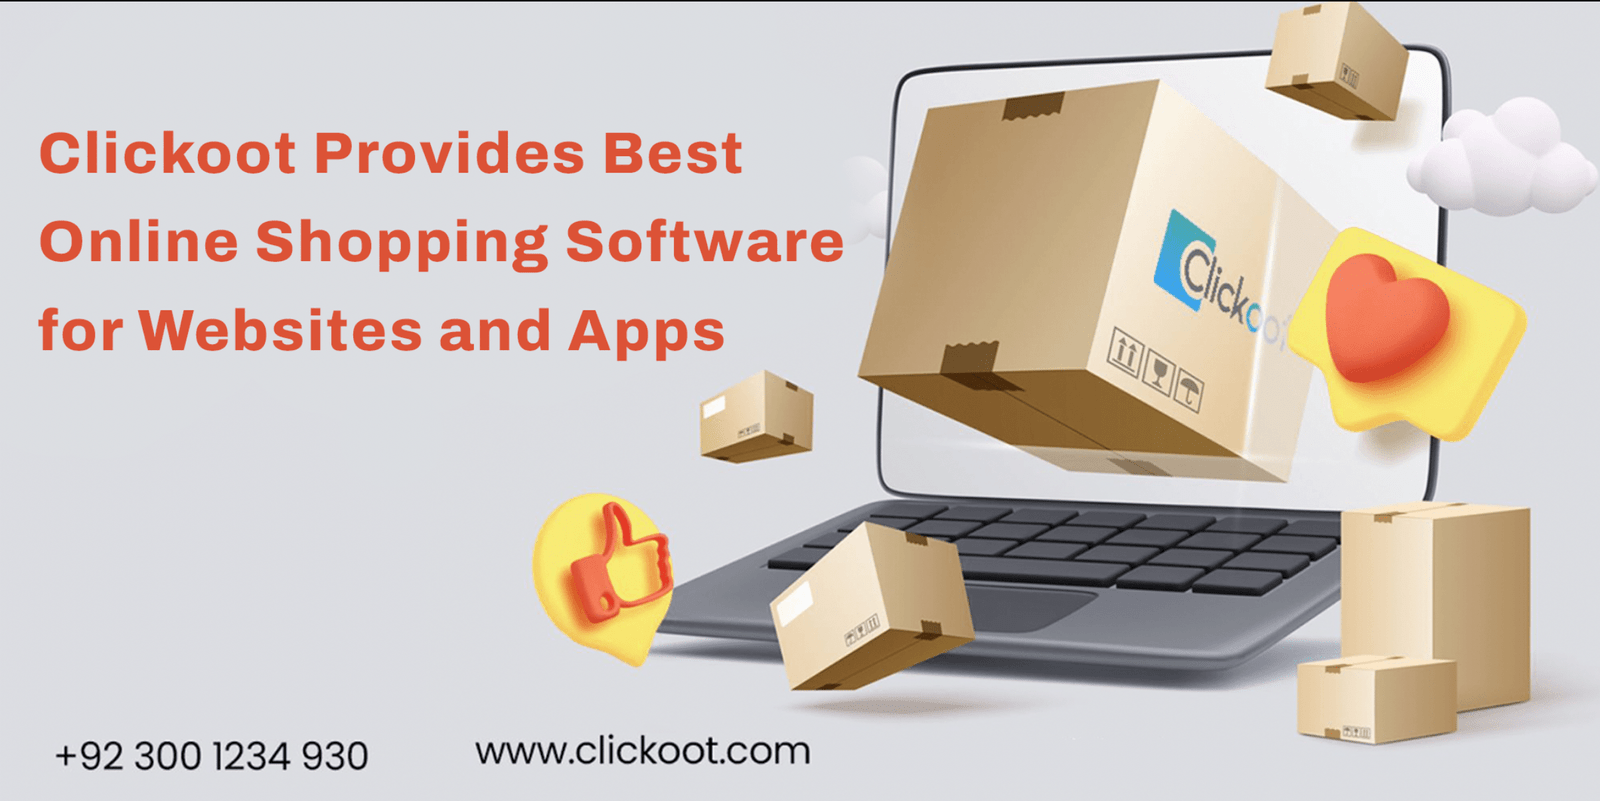 Clickoot Provides Best Online Shopping Software for Websites and Apps